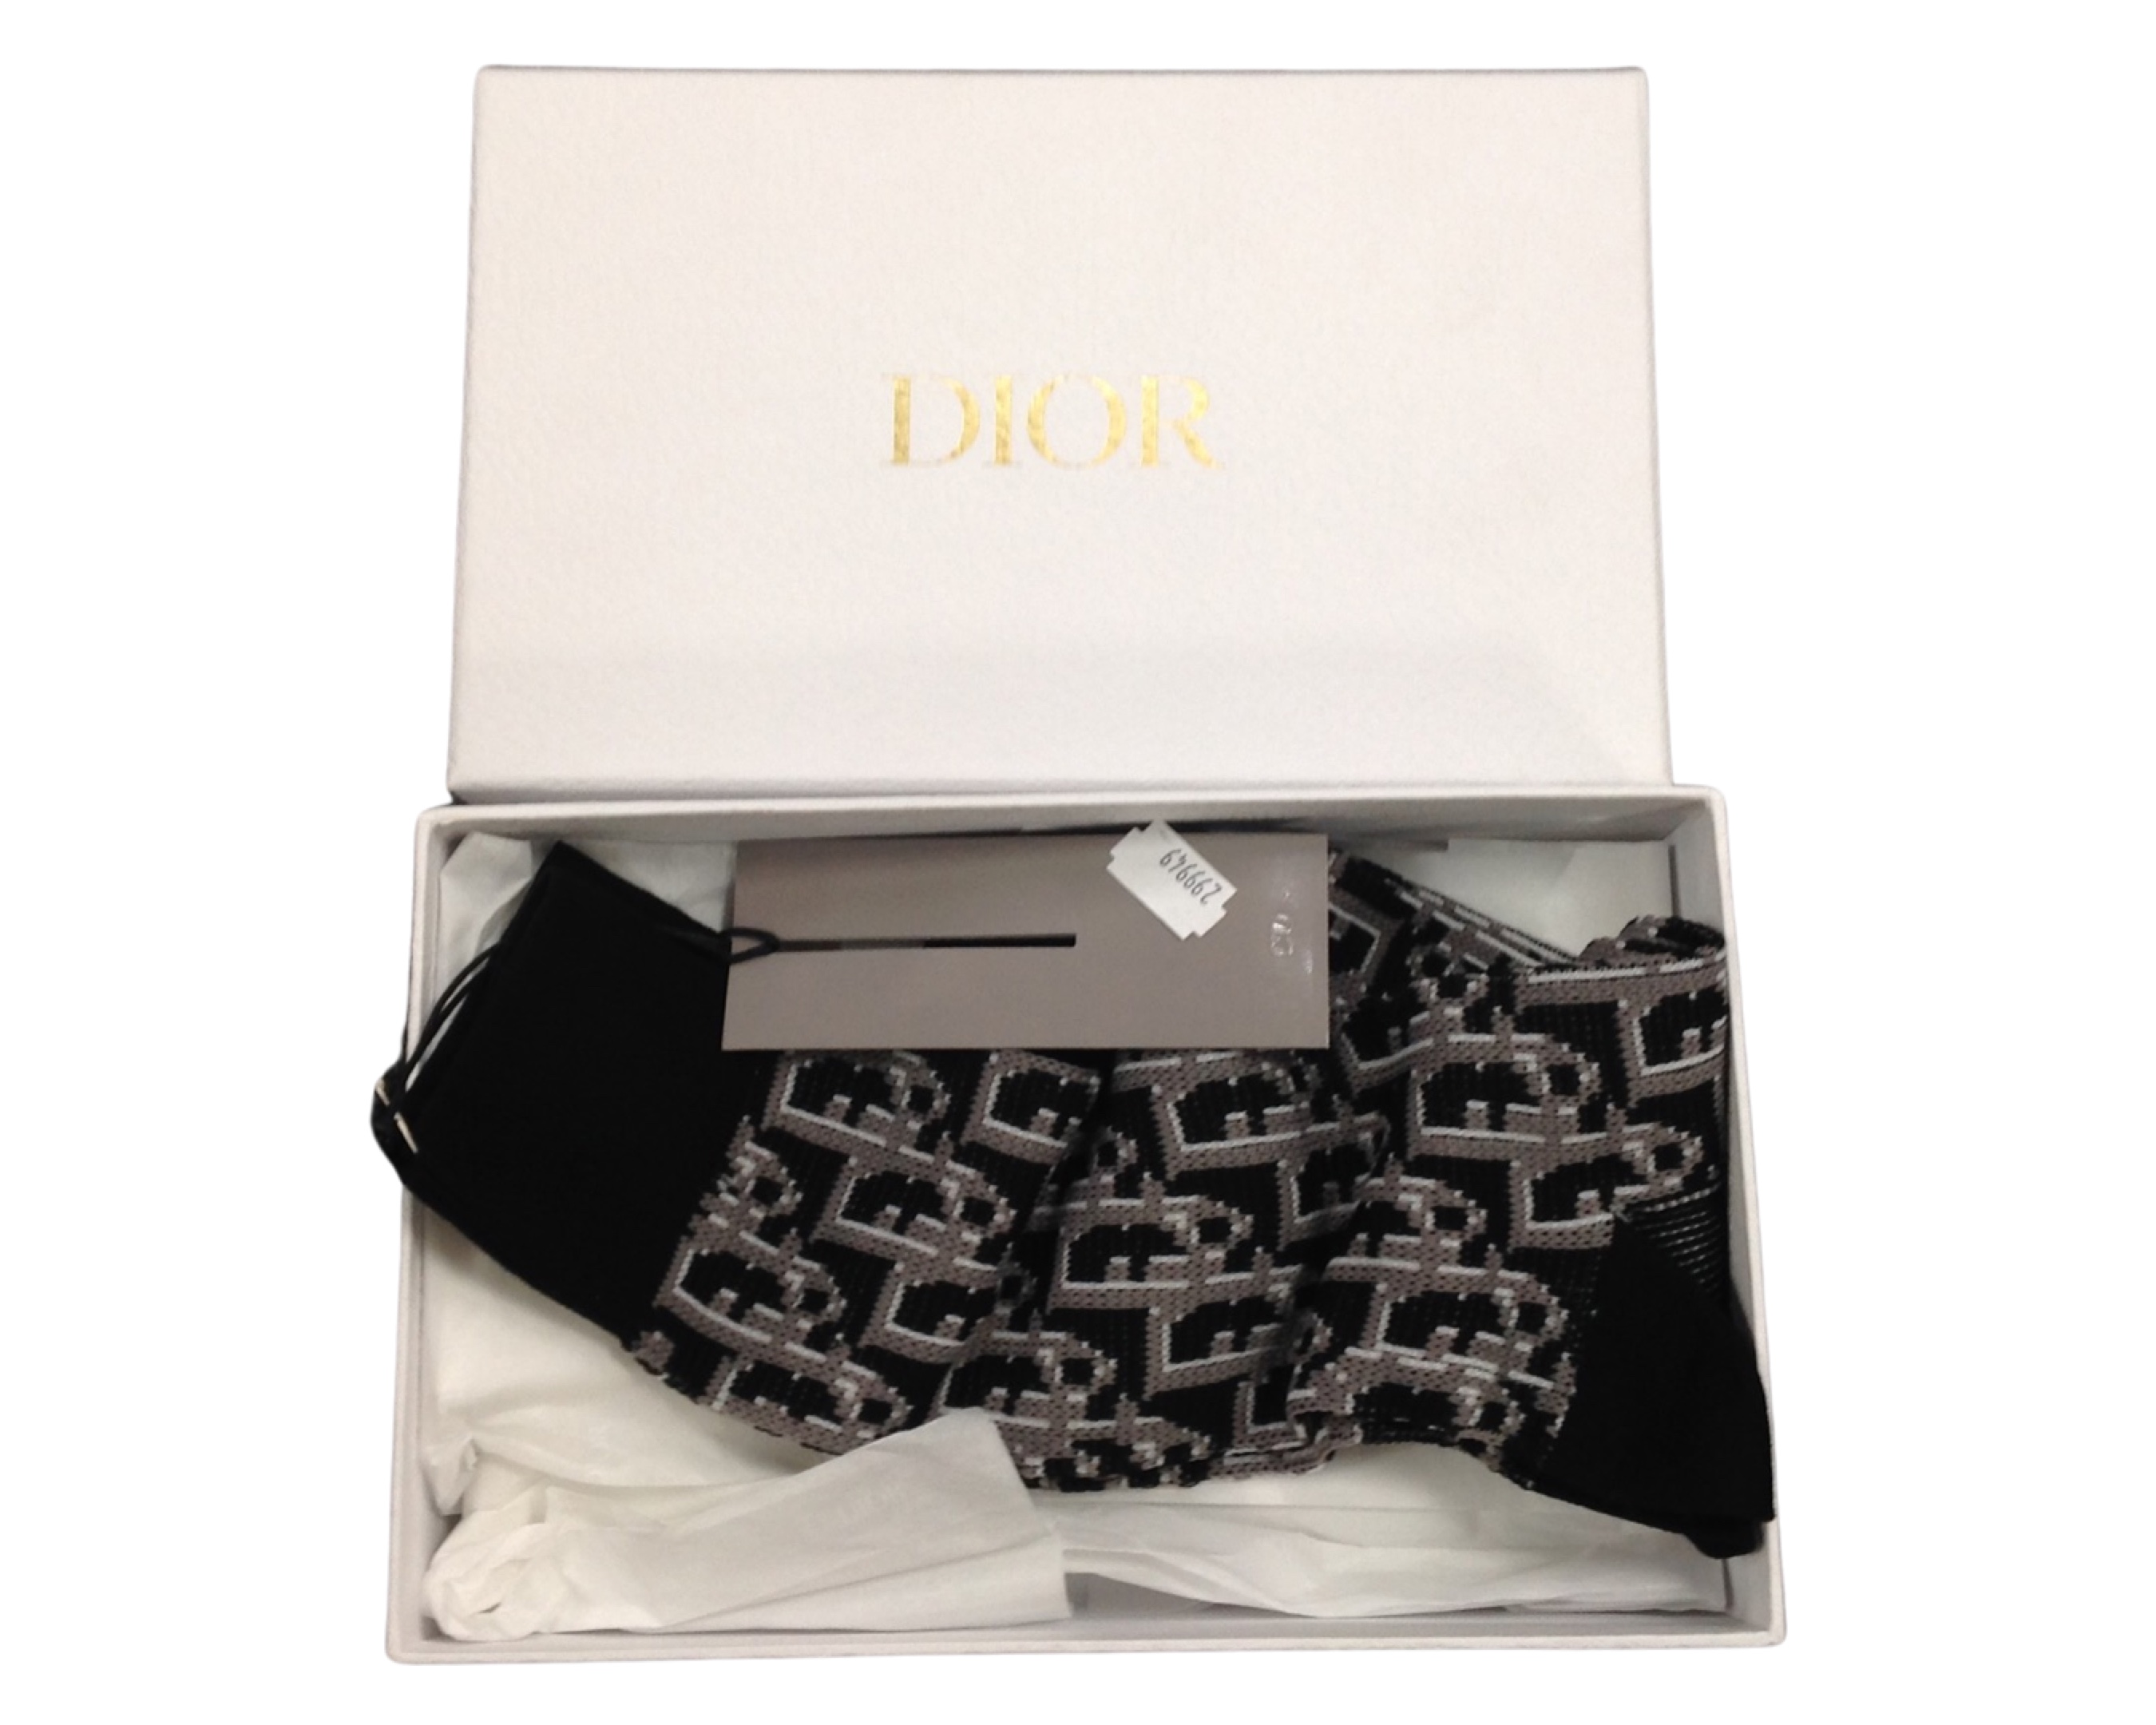 A pair of Christian Dior socks with box, packaging and tag.